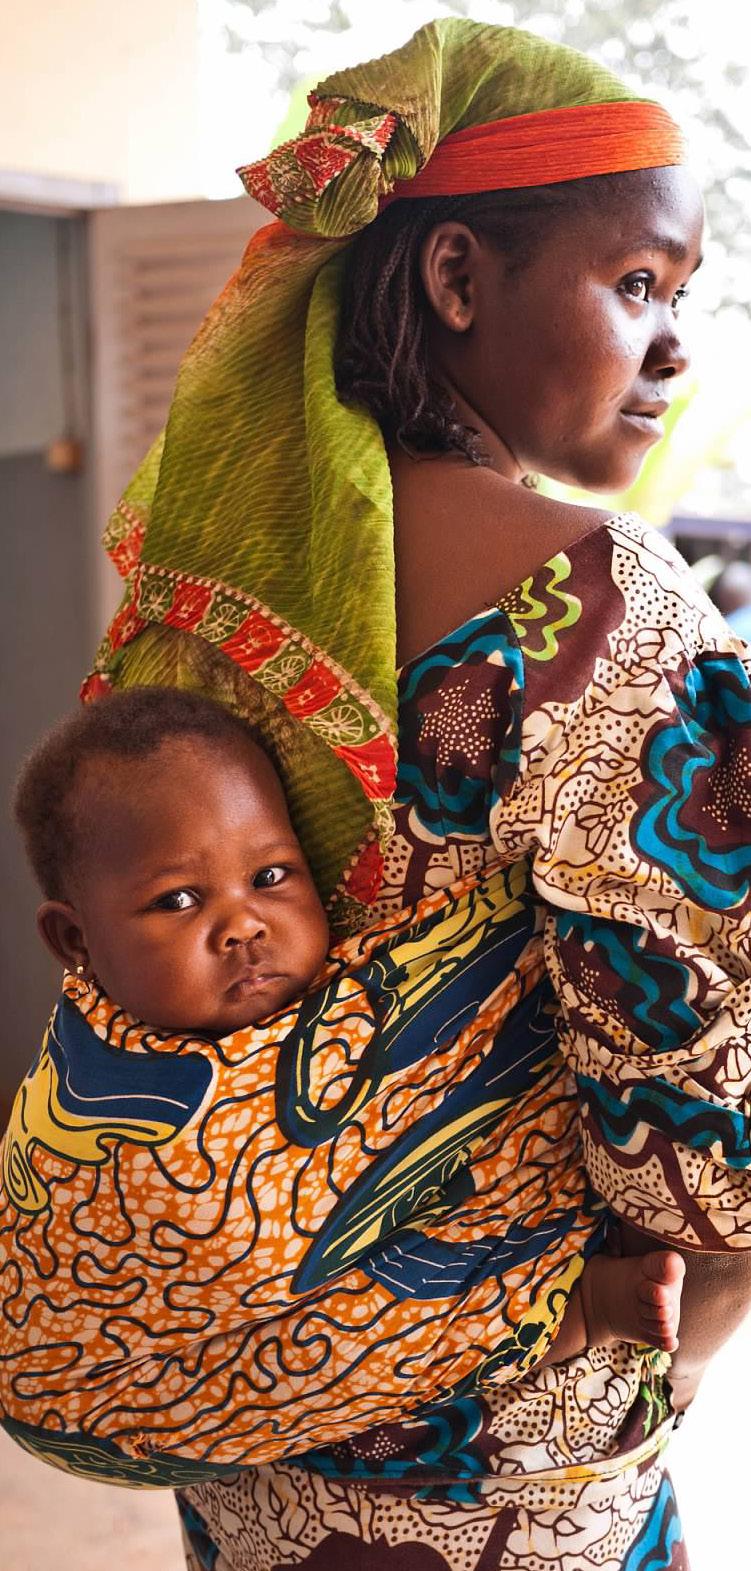 COMMON MARKET FAILURES FOR FAMILY PLANNING In Francophone West Africa, supply and demand for family planning are both low and often fail to intersect.